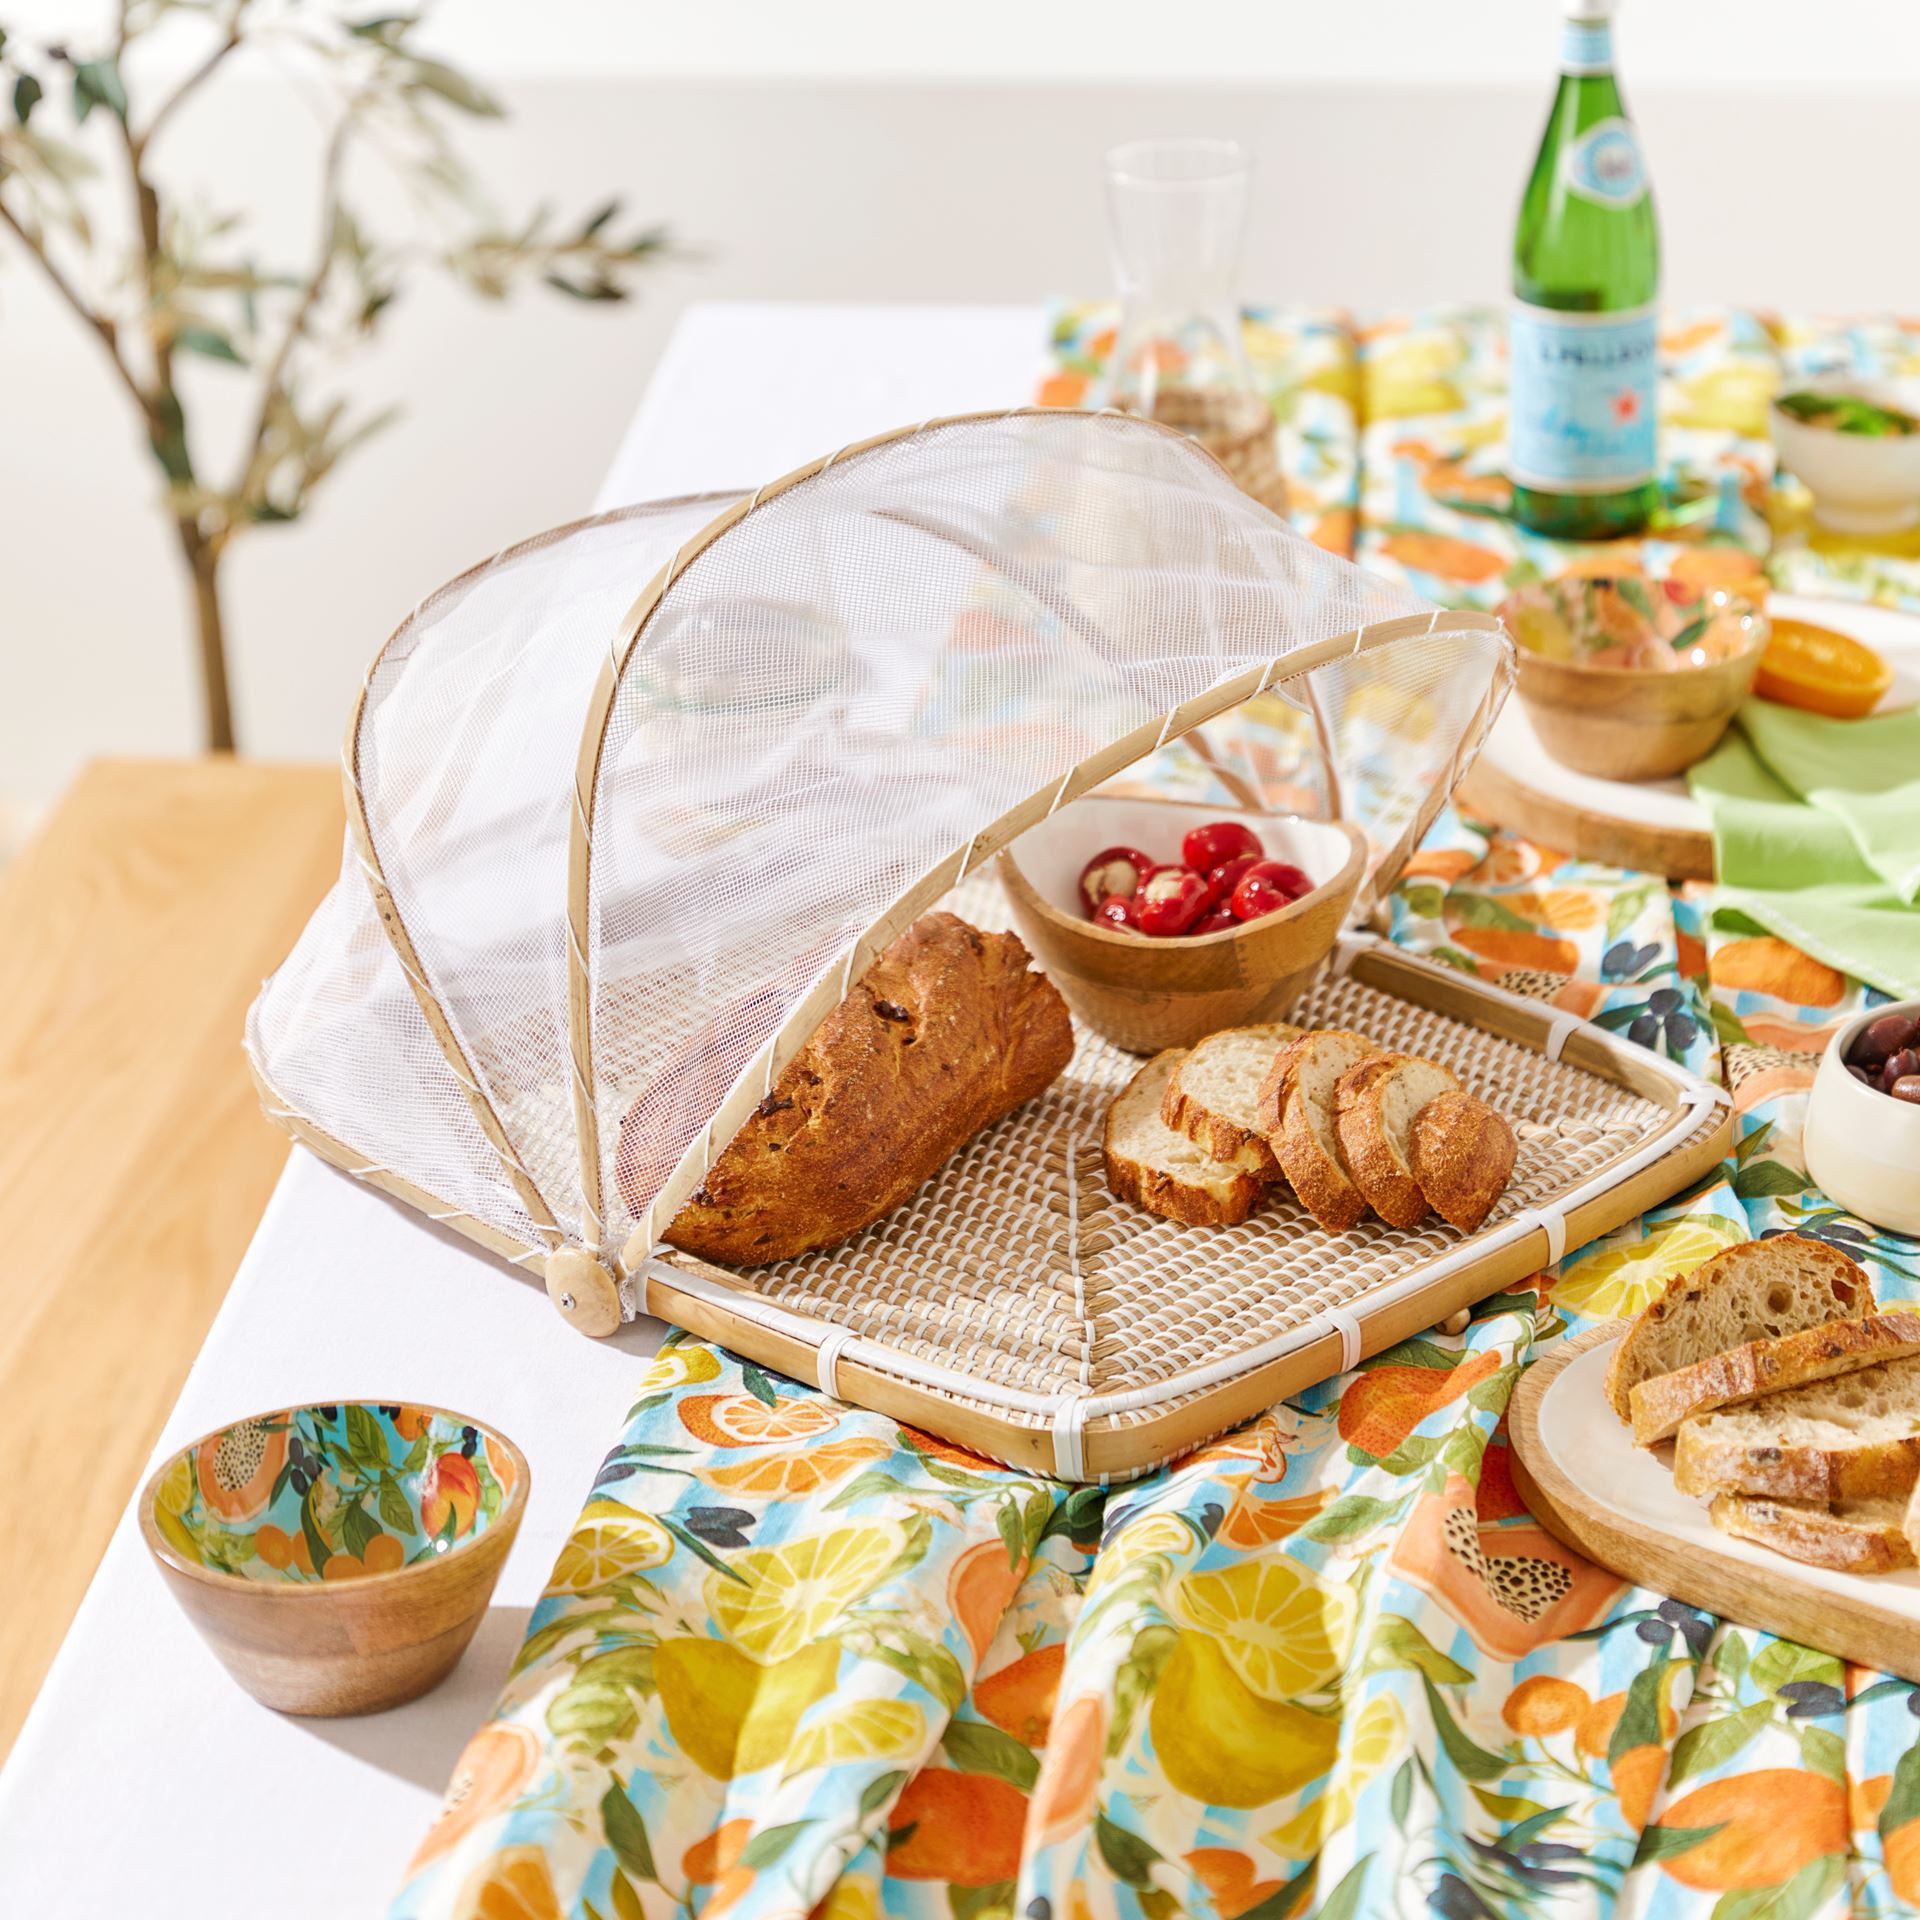 https://www.adairs.com.au/globalassets/13.-ecommerce/03.-product-images/2022_images/homewares/table--servingware/48025-aparri-food-cover-3---styled-shot.jpg?width=1920&mode=crop&heightratio=1&quality=80